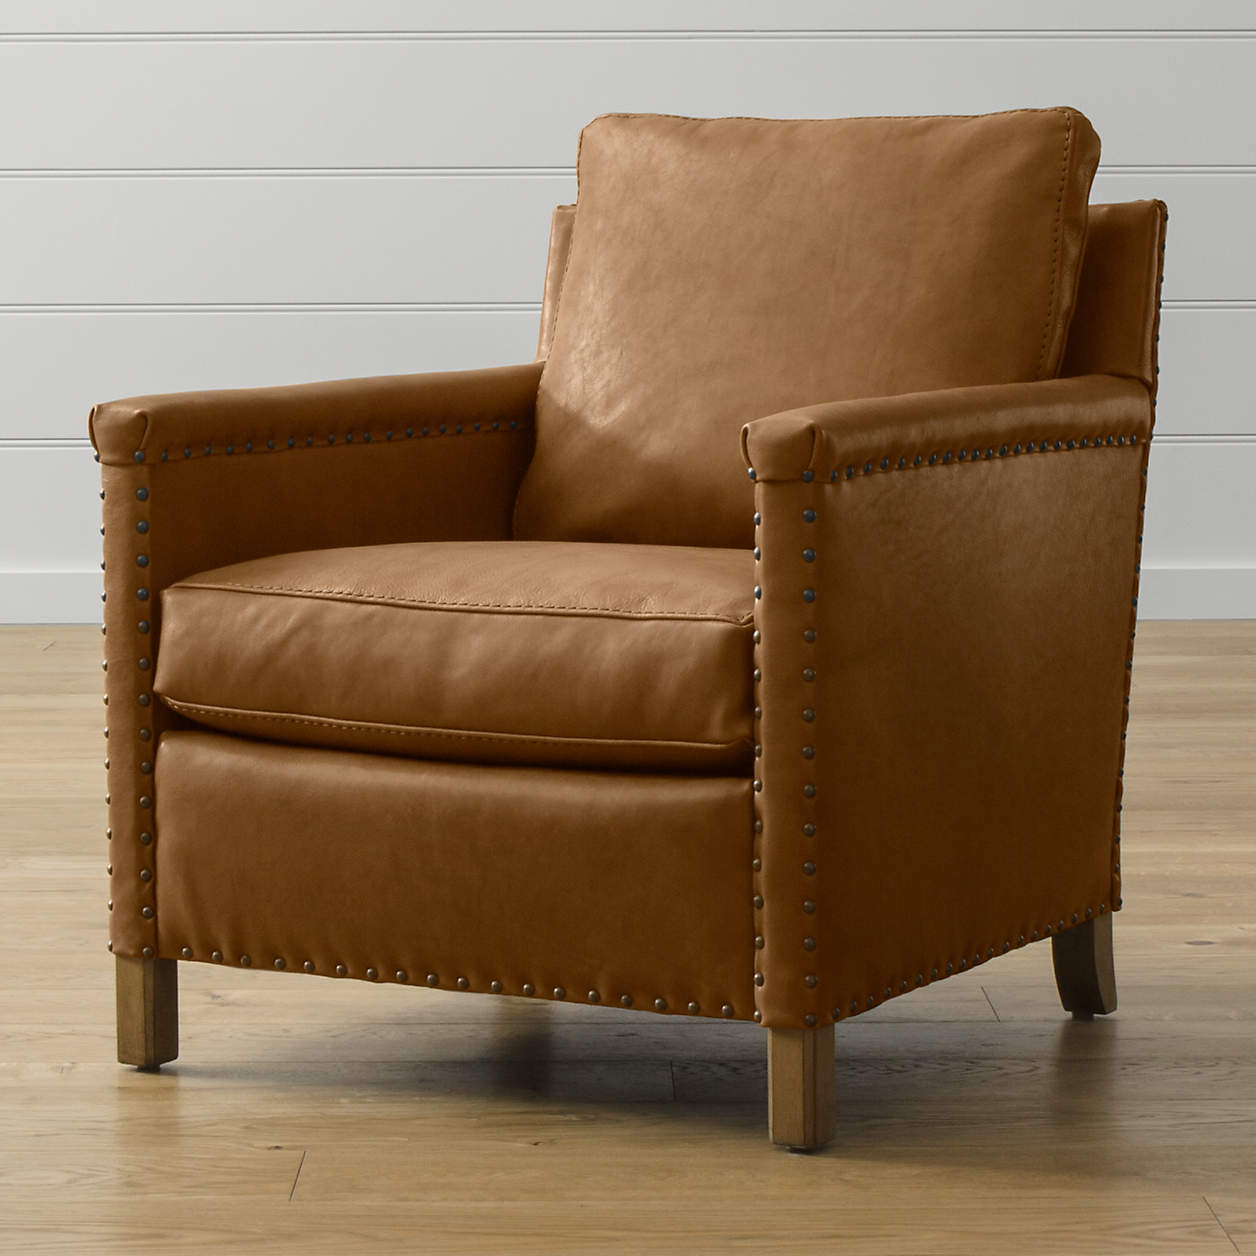 Trevor Leather Chair + Reviews Crate and Barrel